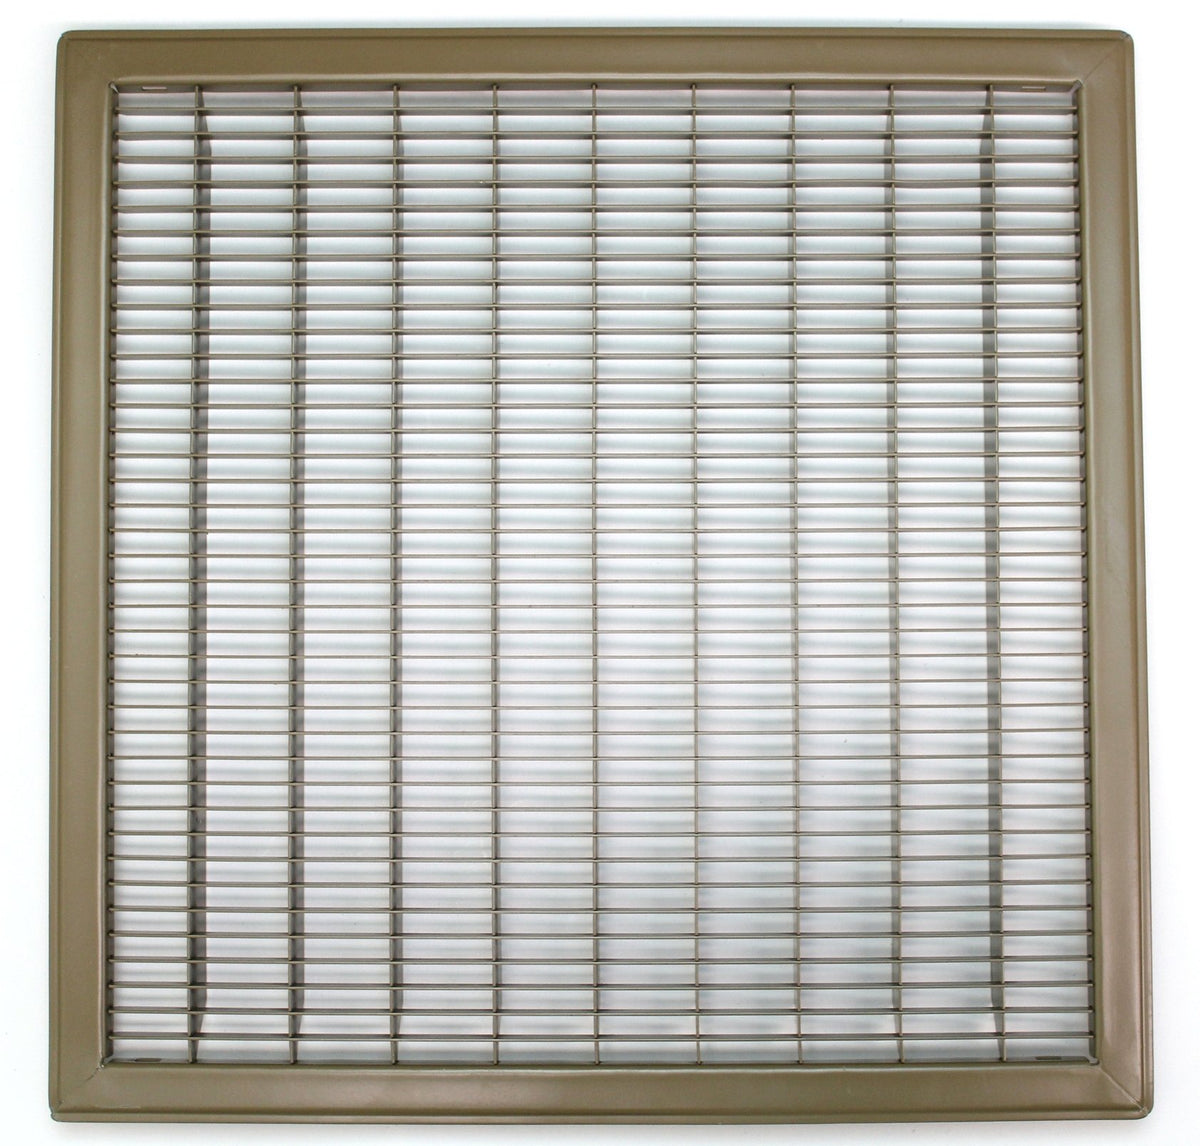 20&quot; X 30&quot; or 30&quot; X 20&quot; Heavy Duty Floor Grille - Fixed Blades Air Grille - Brown [Outer Dimensions: 21.75 X 31.75]